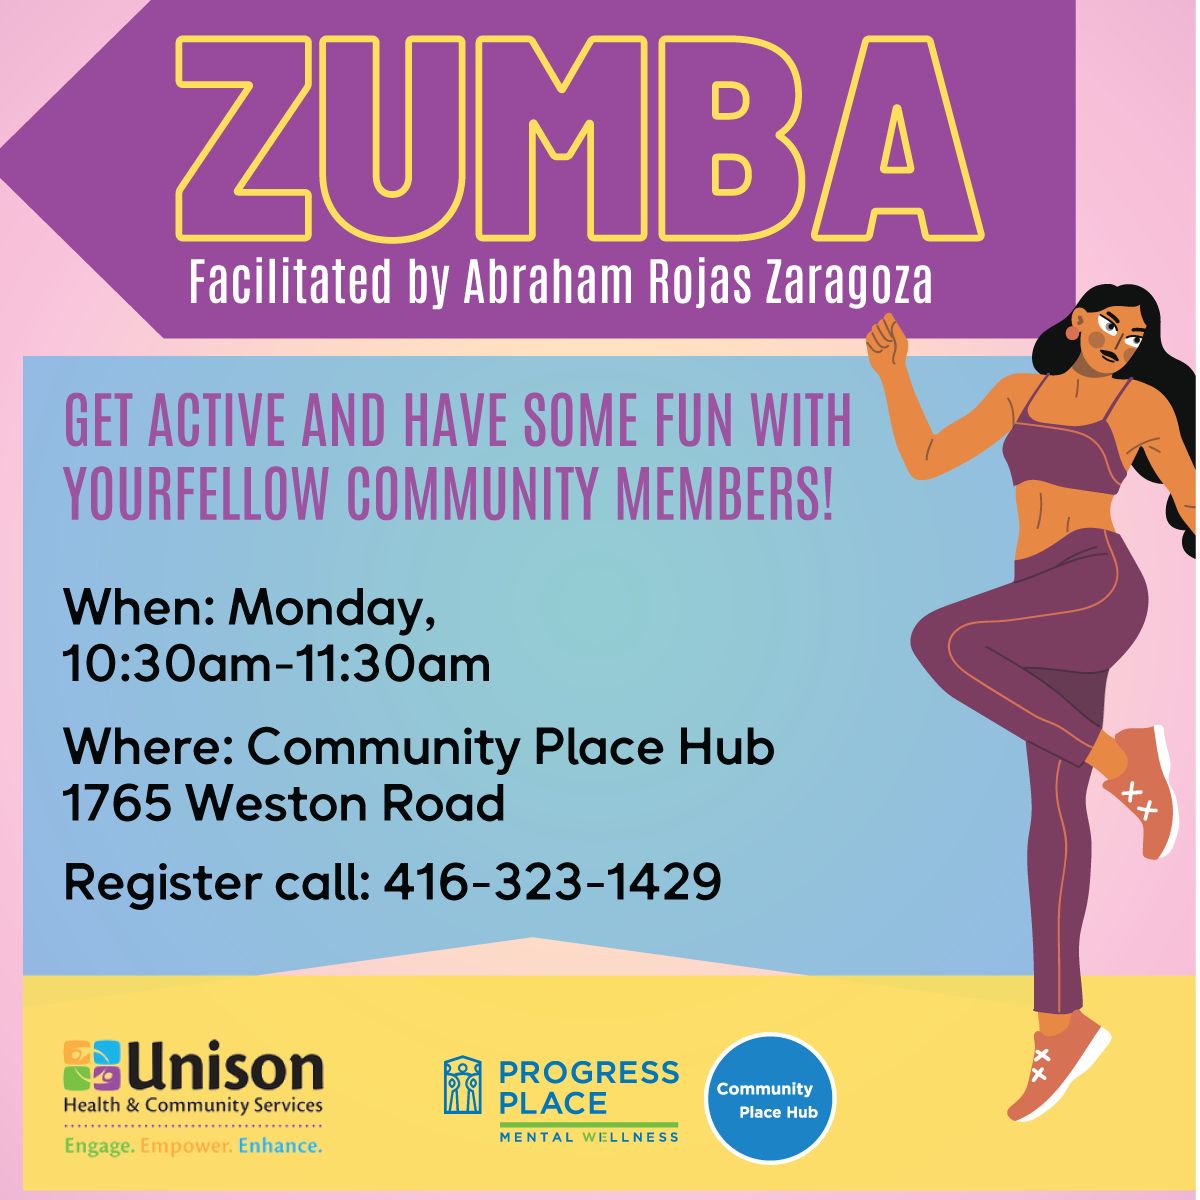 Good morning! Today at the Community Place Hub 💃Zumba: 10:30 - 11:30 am 📍1765 Weston Rd, York, M9N 3P7 Contact us: 📞416-323-1429 or communityplacehub@progressplace.org #healthinformation #diabetes101 #health #wellness